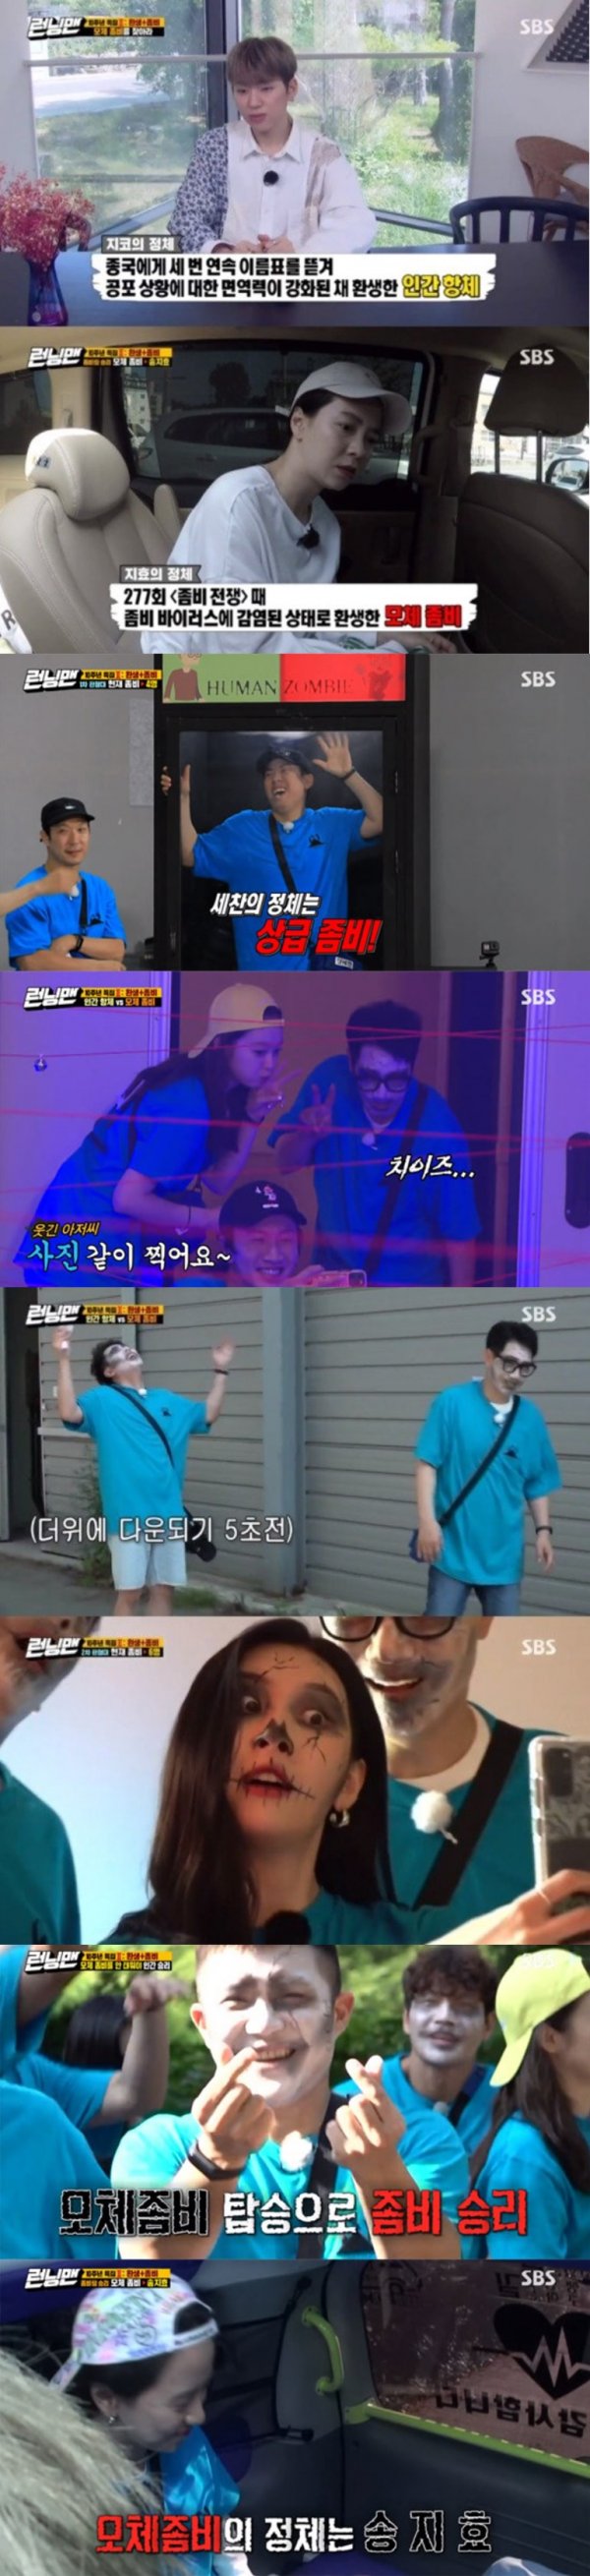 SBS Running Man showed the 2020 Dead Again Special, the second part of Legend Race, to mark the 10th anniversary of the broadcast, and soared to 7.1% of the highest audience rating per minute.Race is the 2020 version of Dead Again Race, which was a big topic with a superstructure and a reverse story that crossed time and space in the 1930s and 2013 at the time of broadcasting in 2013.Singer Zico, Sunmi, comedian Jo Se-ho, and actor Lee Do-hyun joined as guests and added meaning.The members were divided into Zico team, Sunmi team, Seho team, and Dohyeon team, and they played against Zombie 2: The Dead are Among Us.In particular, Zombie 2: The Dead are Among Us had to be divided into the top-level Zombie 2: The Dead are Among Us and the bottom-level Zombie 2: The Dead are Among Us, and then found a decision ticket to set up the top-level Zombie 2: The Dead are Among Us on the judging panel.With comedian Ji Seok-jin being attacked by Zombie 2: The Dead are Among Us and becoming the junior Zombie 2: The Dead are Among Us, Yang Se-chan, who was first on the judging board, failed to find the vaccine and became the senior Zombie 2: The Dead are Among Us.Since then, the members have become senior, junior Zombie 2: The Dead are Among Us, narrowing the position of humans.Among them, Yoo Jae-Suk survived and found the Infection room by chance, and he got into the emergency car with Zico, who revealed that he was a human antibody, and Song Ji-hyo, who ate the vaccine.But it turns out that Song Ji-hyo is the mother of Zombie 2: The Dead are Among Us, and humans are defeated.The scene had the highest audience rating of 7.1% per minute, taking the best one minute.On the other hand, Running Man, which will be broadcast on the 12th (Sun), will be decorated with a special live broadcast of the 10th anniversary with viewers.